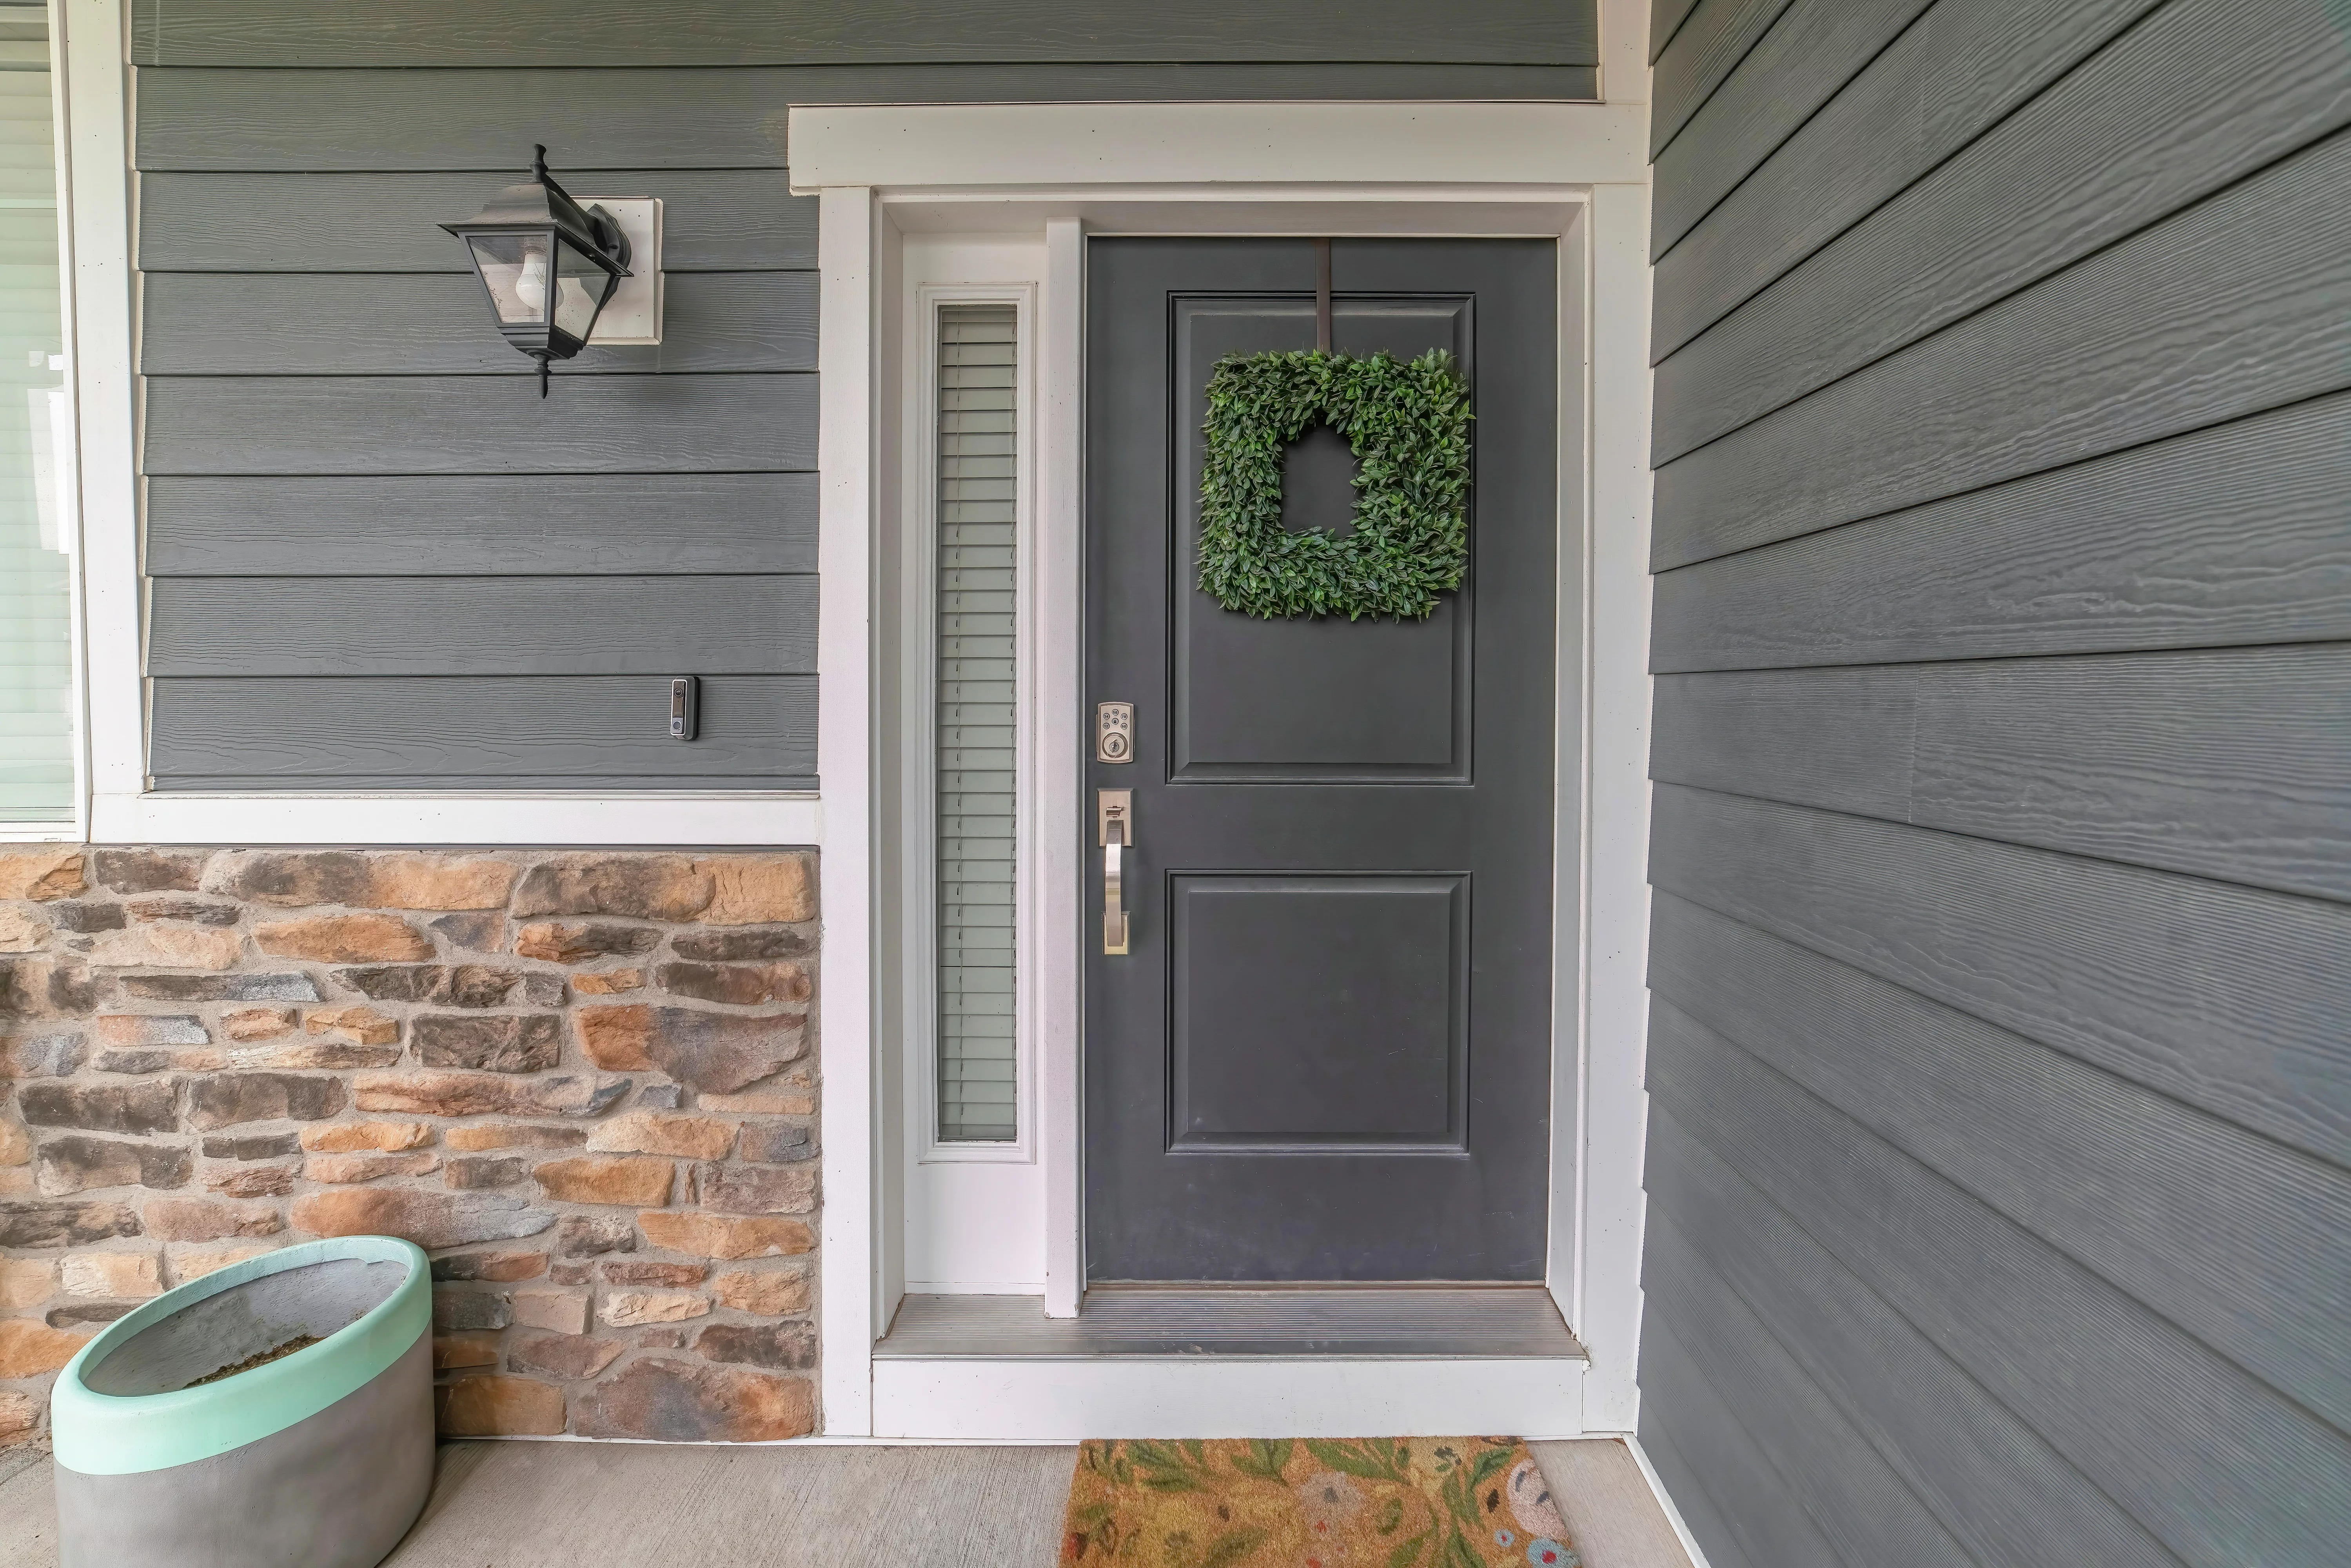 entrance-to-a-house-with-side-light-and-gray-front-door-decorated-with-wreath